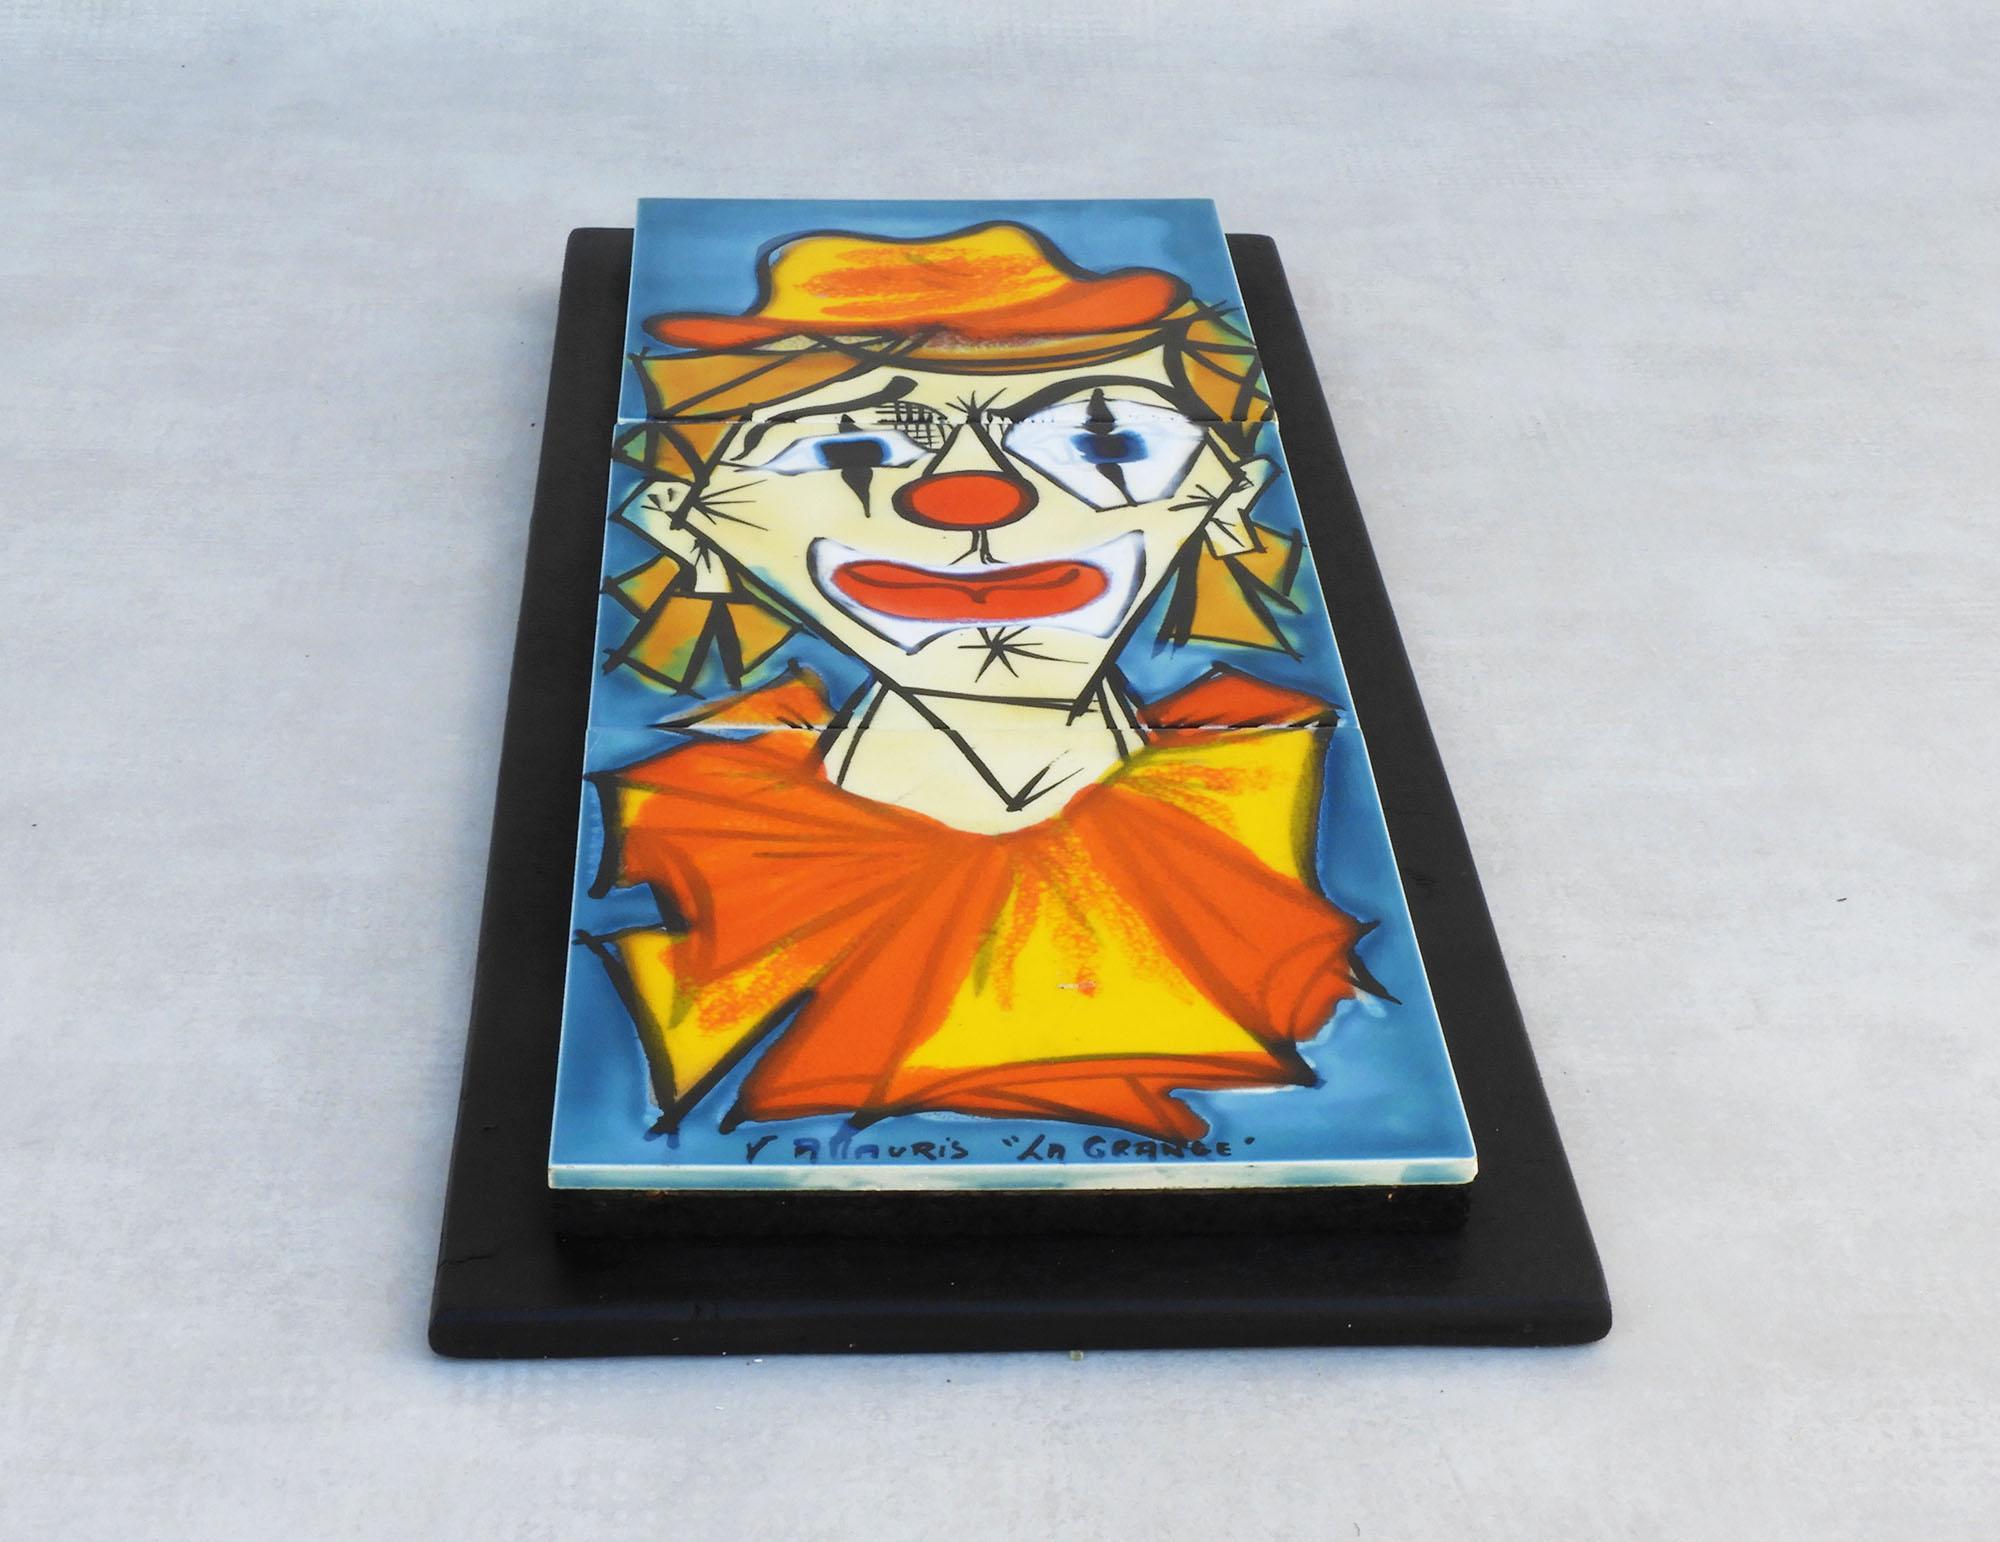 French Wall Art Panel ‘LE CLOWN’ by Artist La Grange for Vallauris C1960 FREE SHIPPING